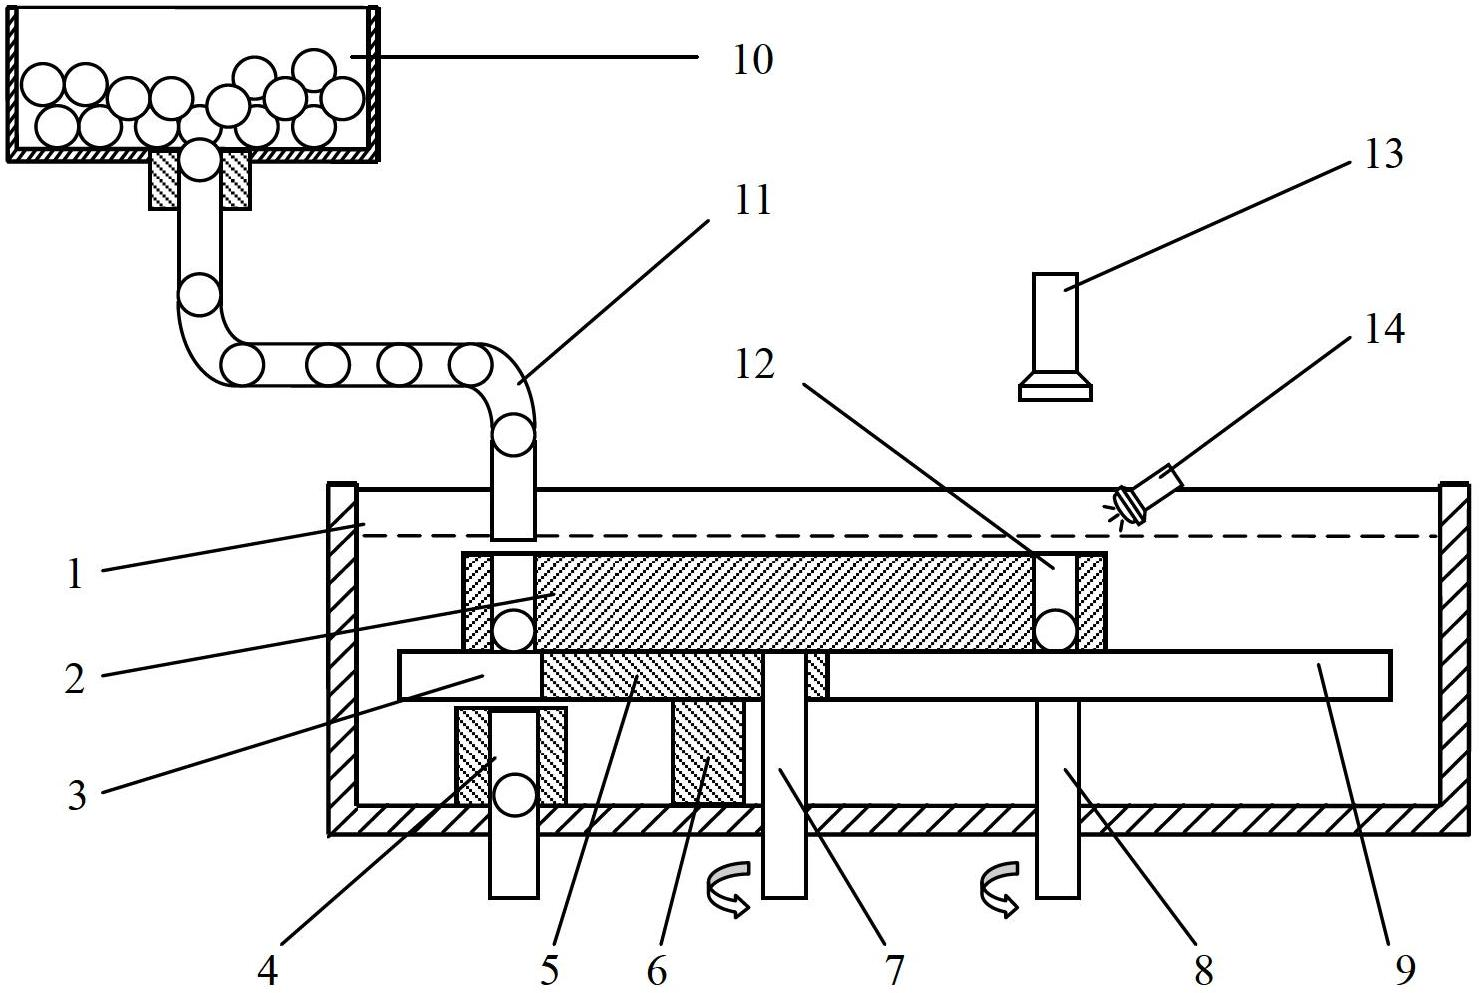 Steel ball sorting device and method based on machine vision